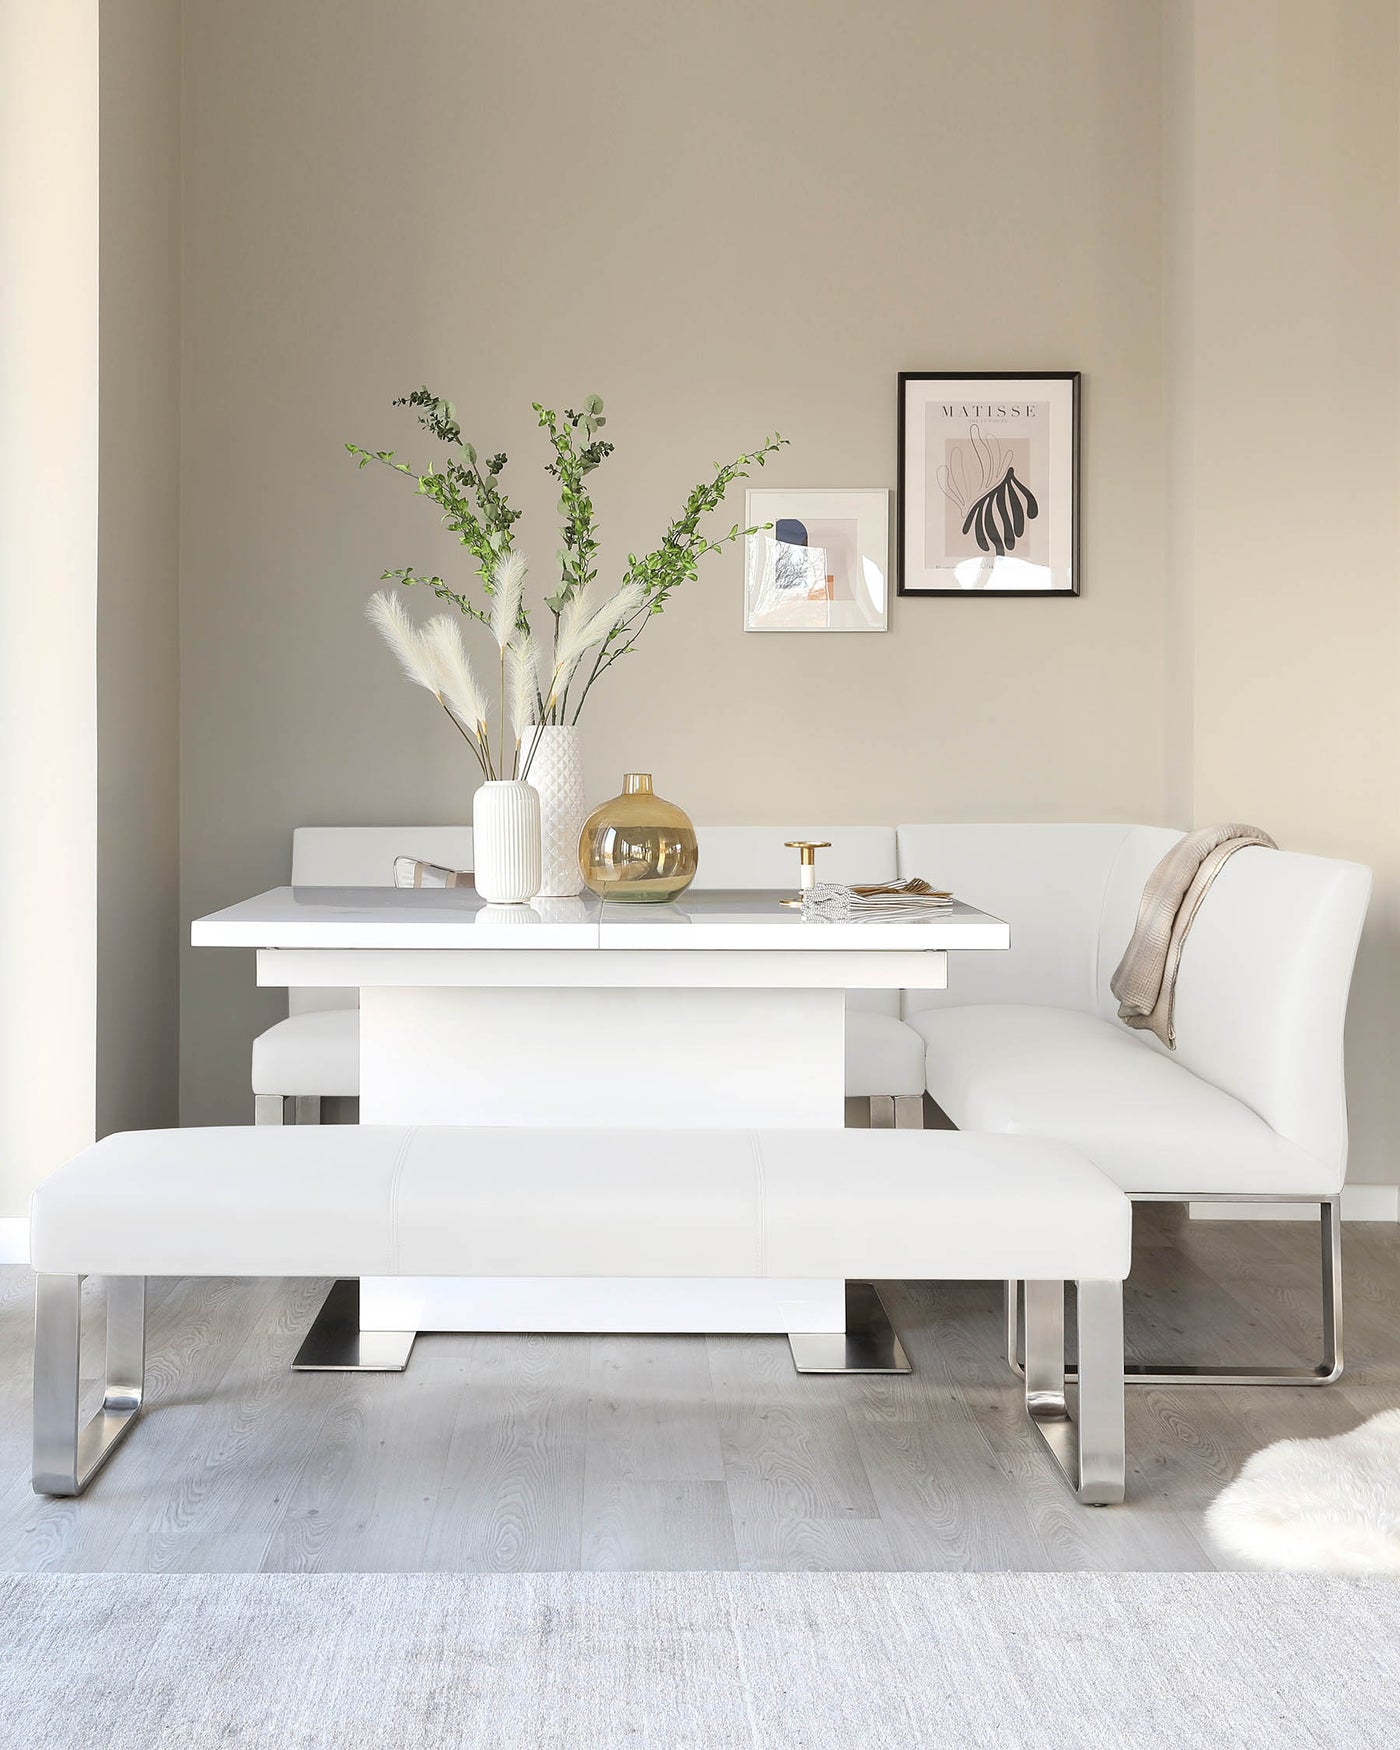 Modern minimalist white dining set including a rectangular table with a sleek surface and clean lines, accompanied by a matching bench and a curved-end L-shaped banquette, all with metallic silver legs.